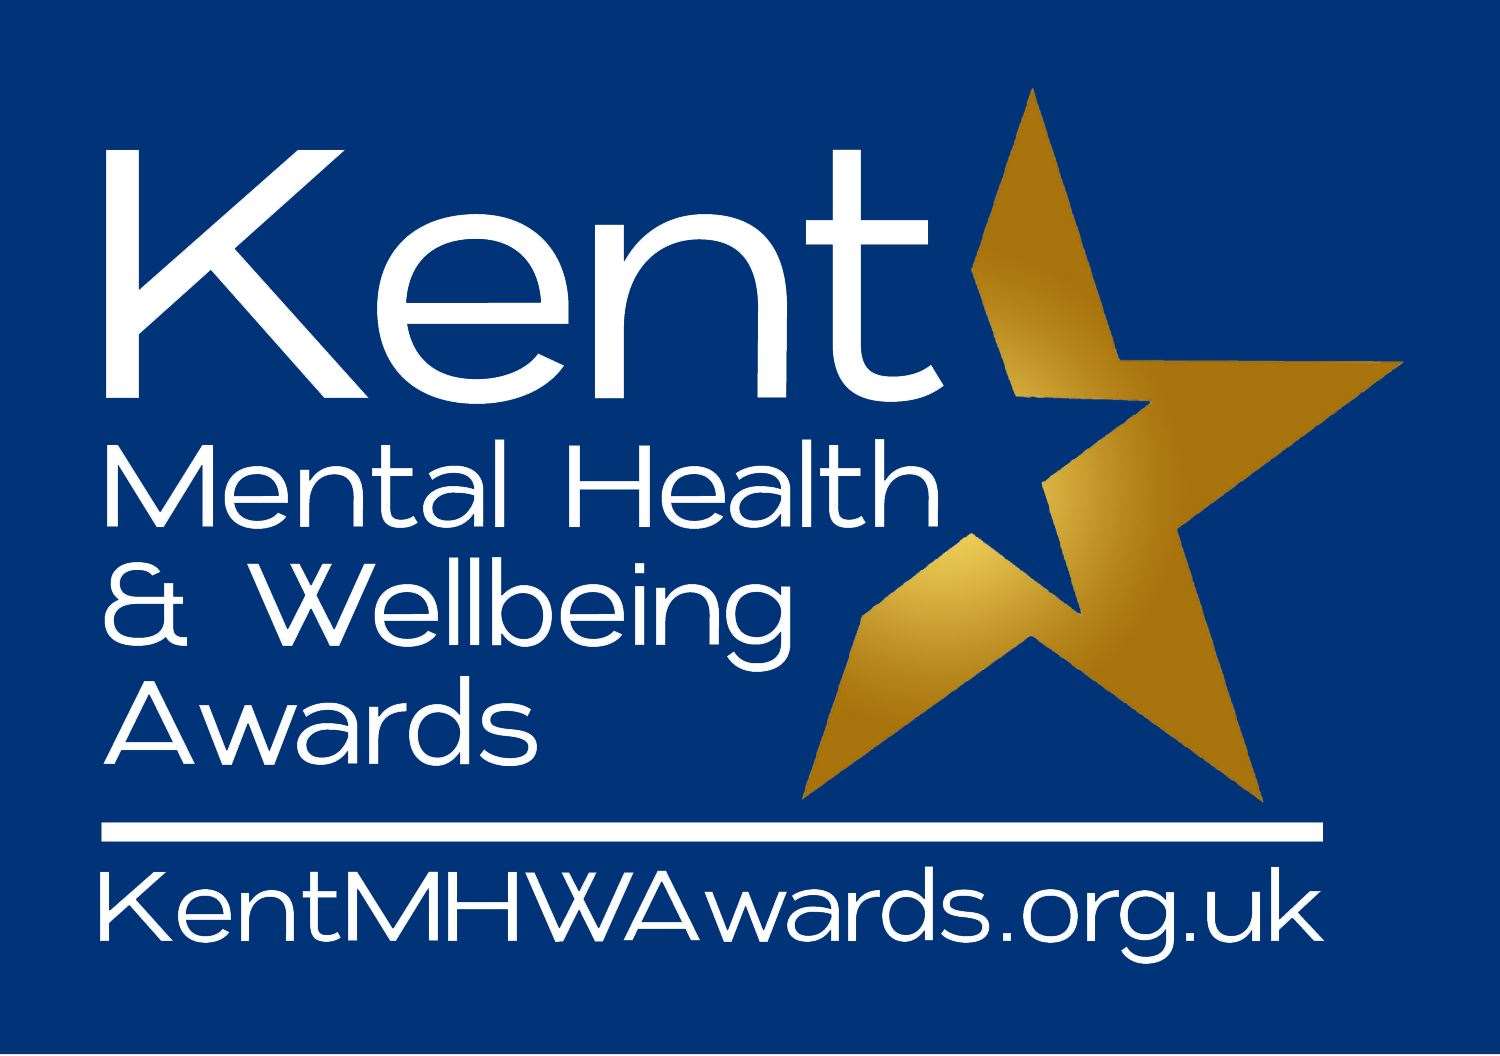 The Kent Mental Health & Wellbeing Awards were held in Ashford on Friday